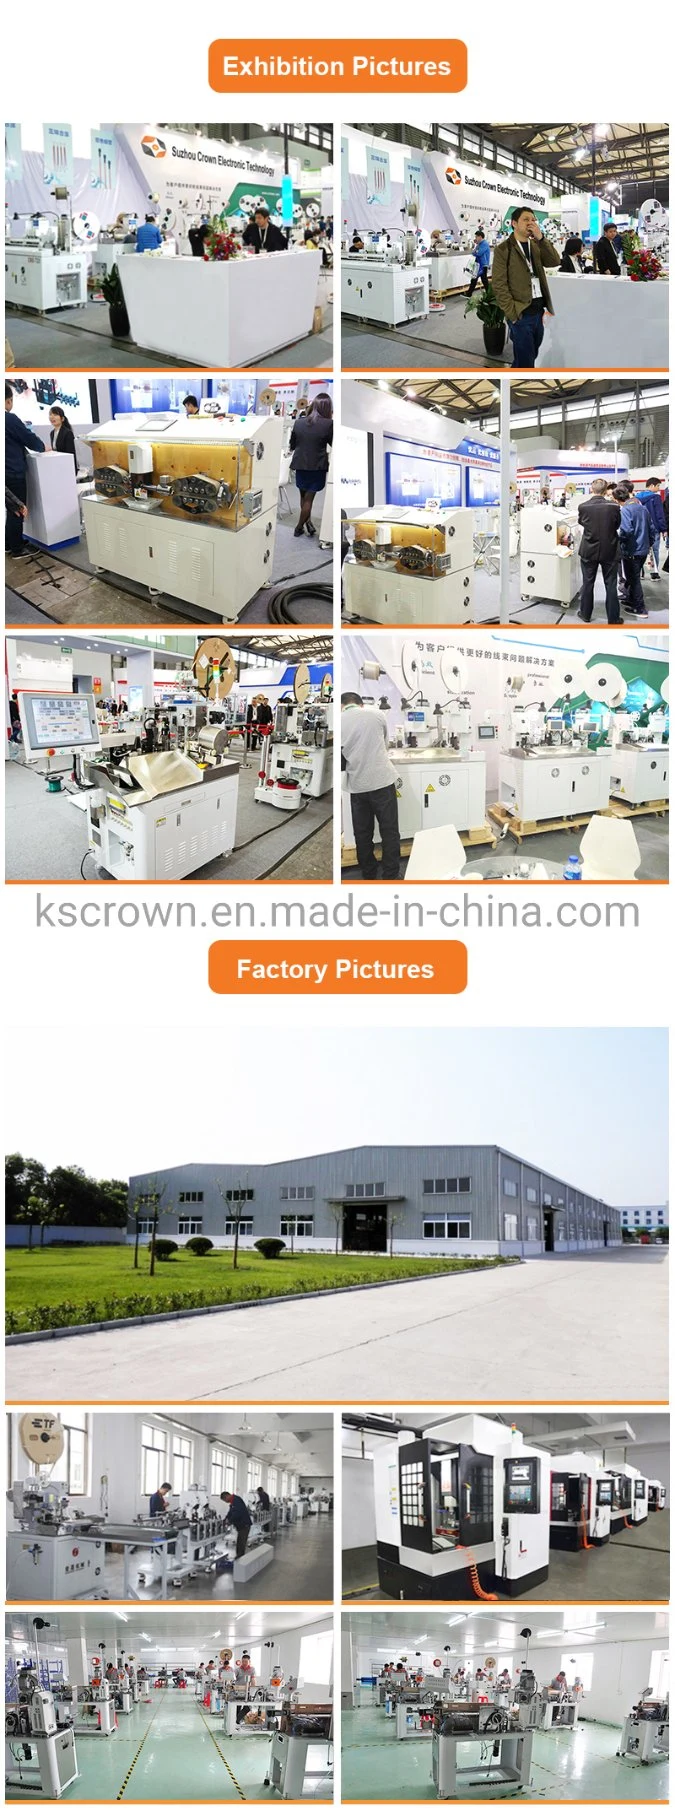 Semi Automatic Terminal Crimping Machine Stripping Wire Terminal Press Machine for Cable